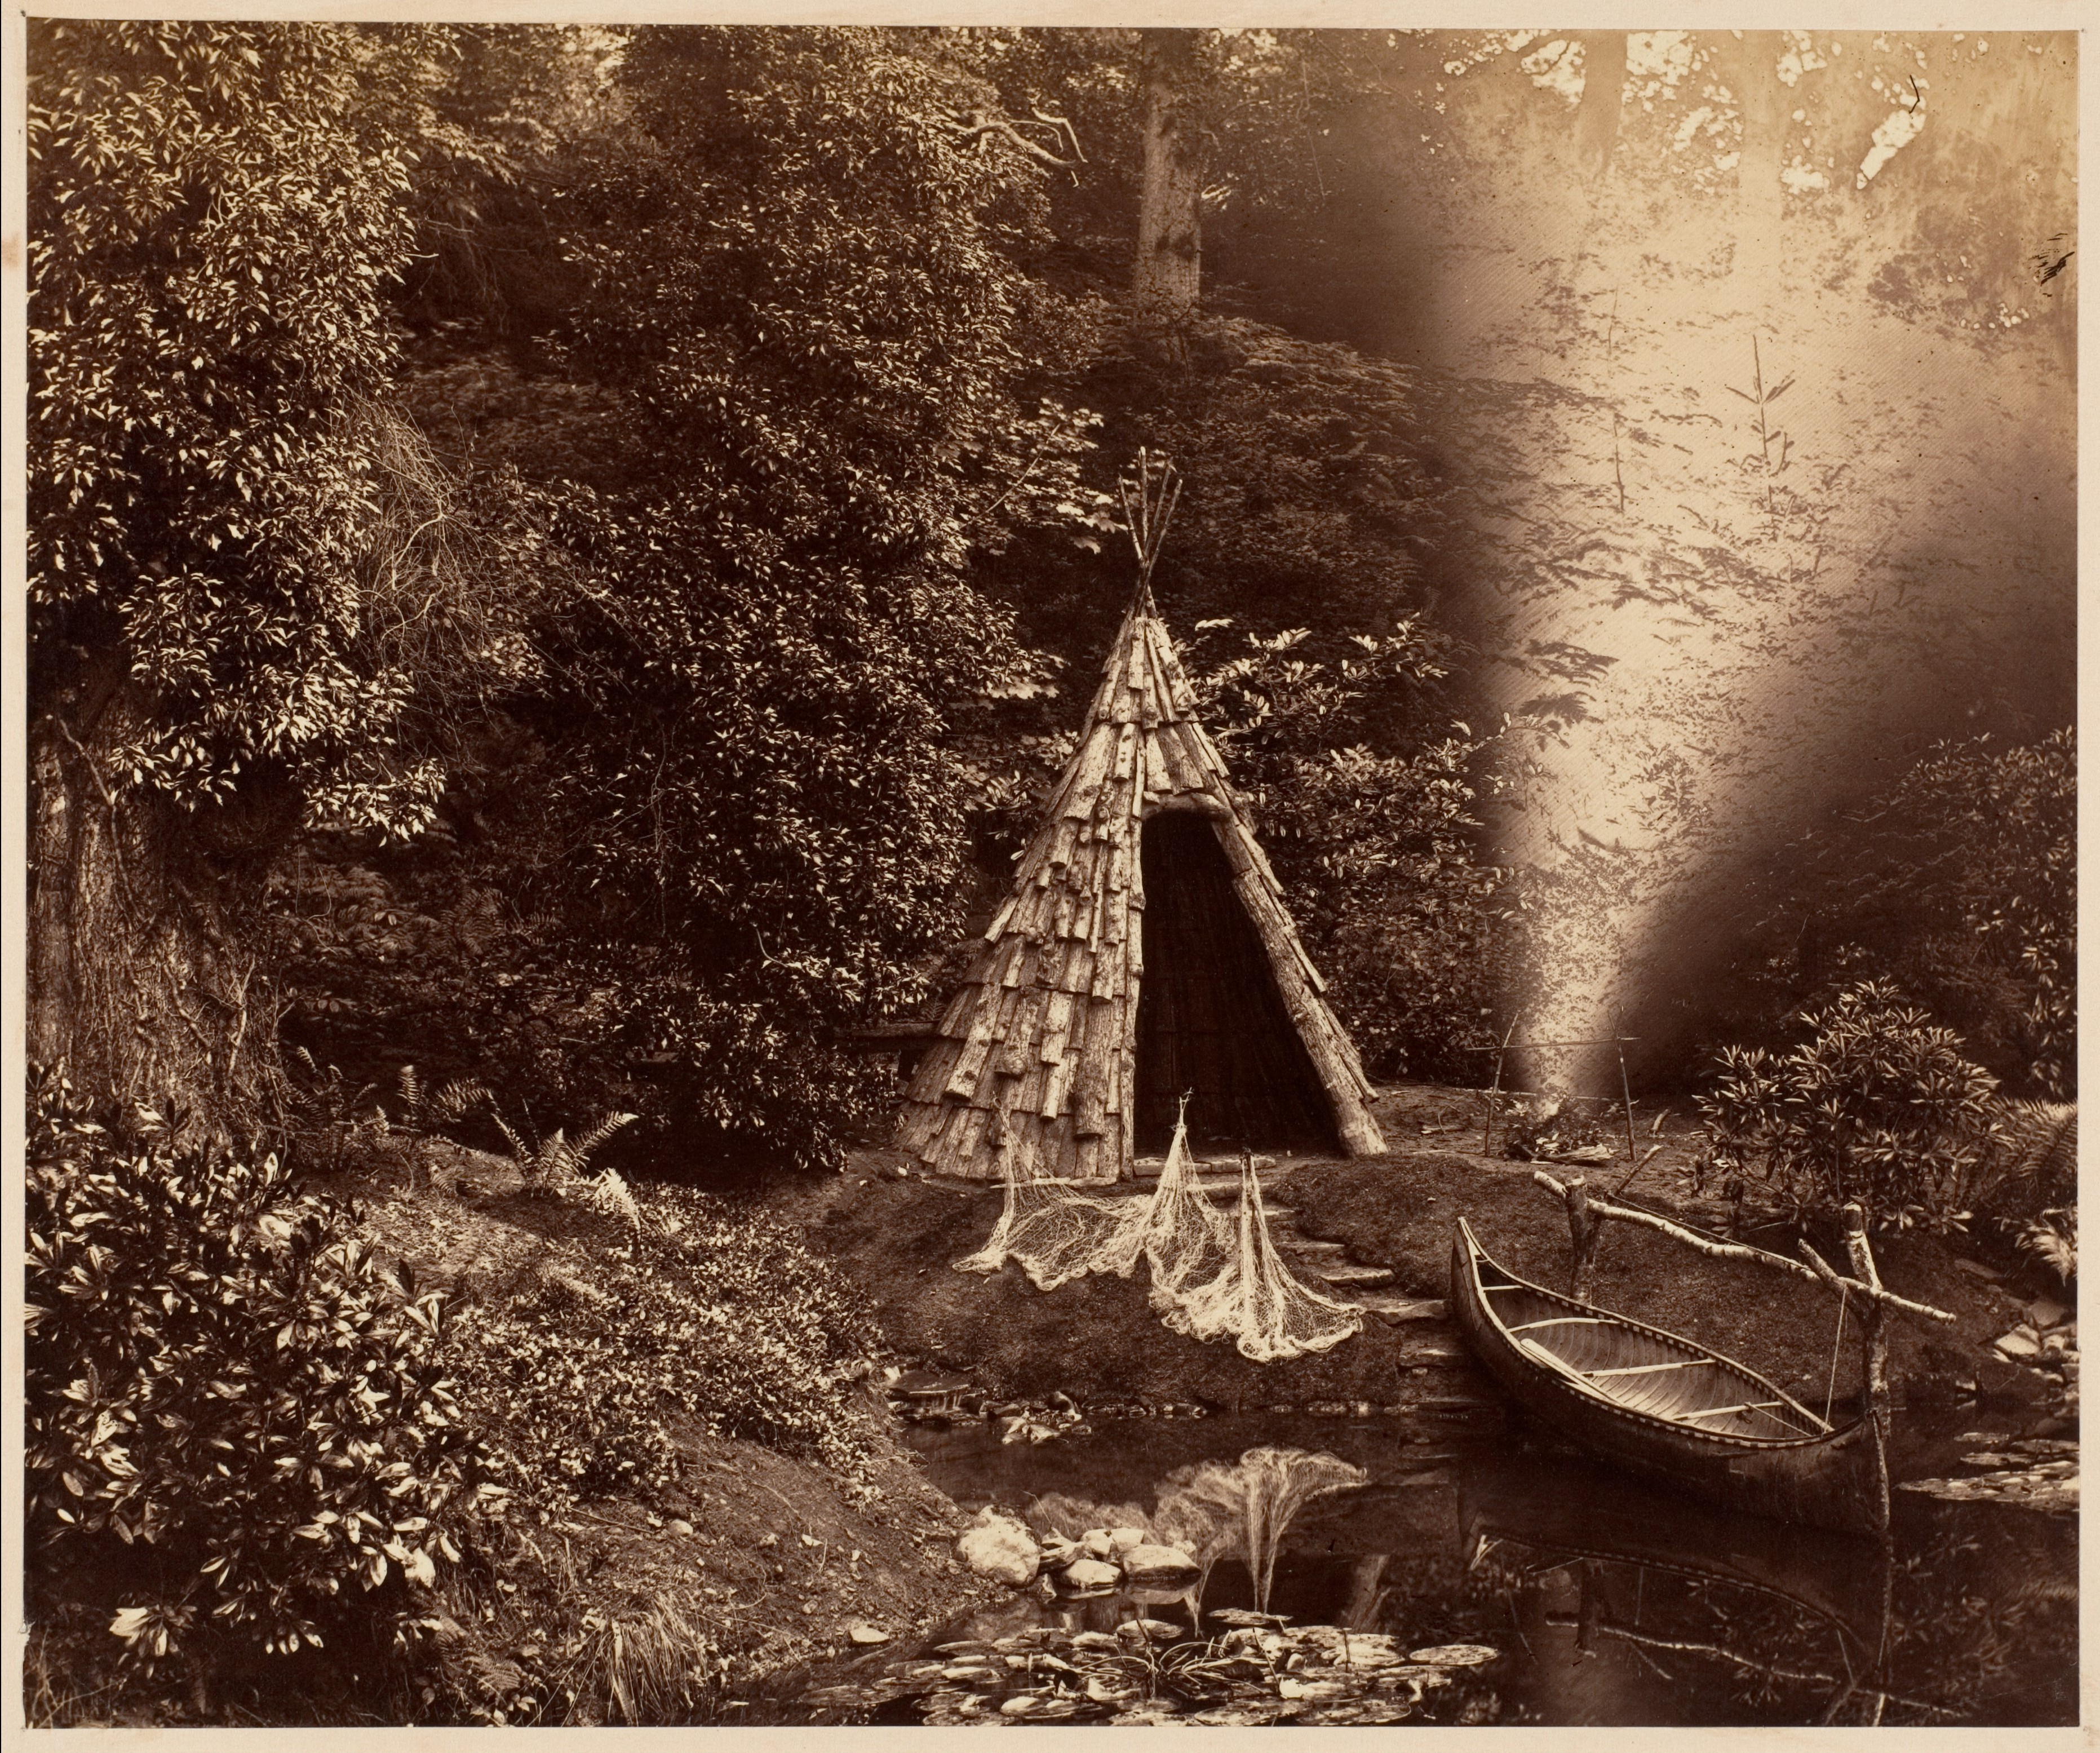 The Wigwam, a Canadian Scene at Penllergare - Photographs